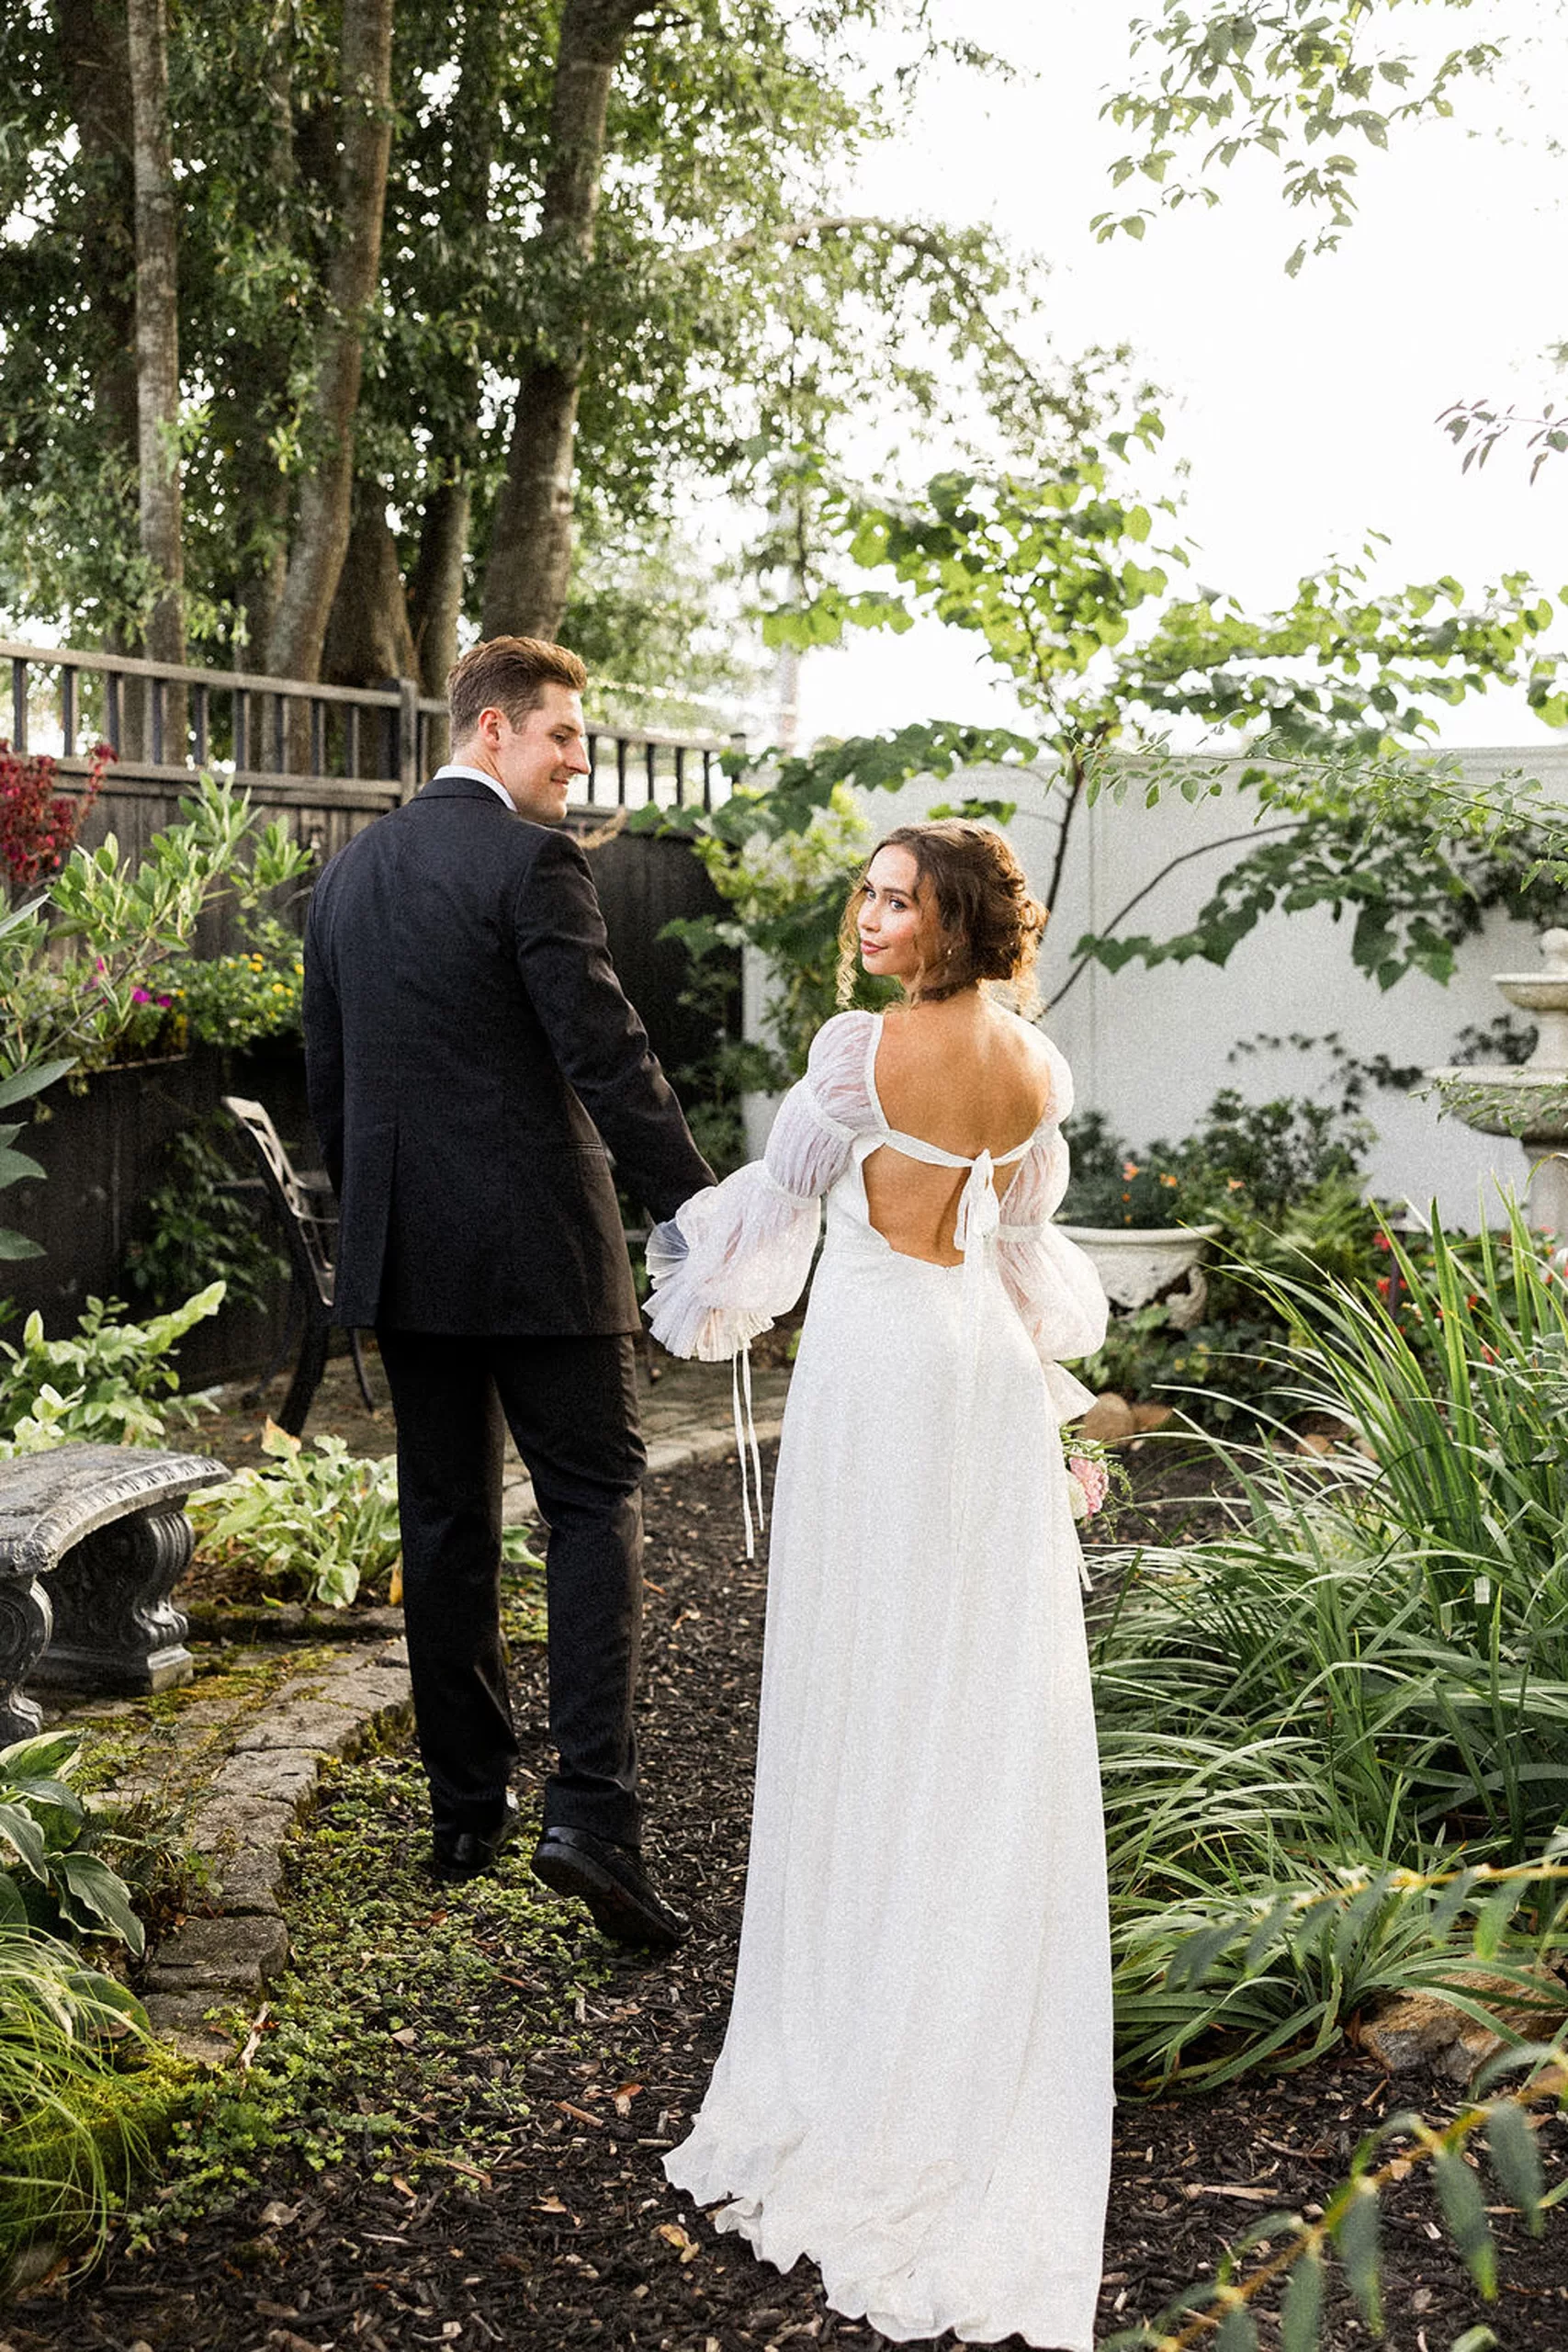 A groom leads his bride by the hand as they walk through a garden by a stone bench and bird bath